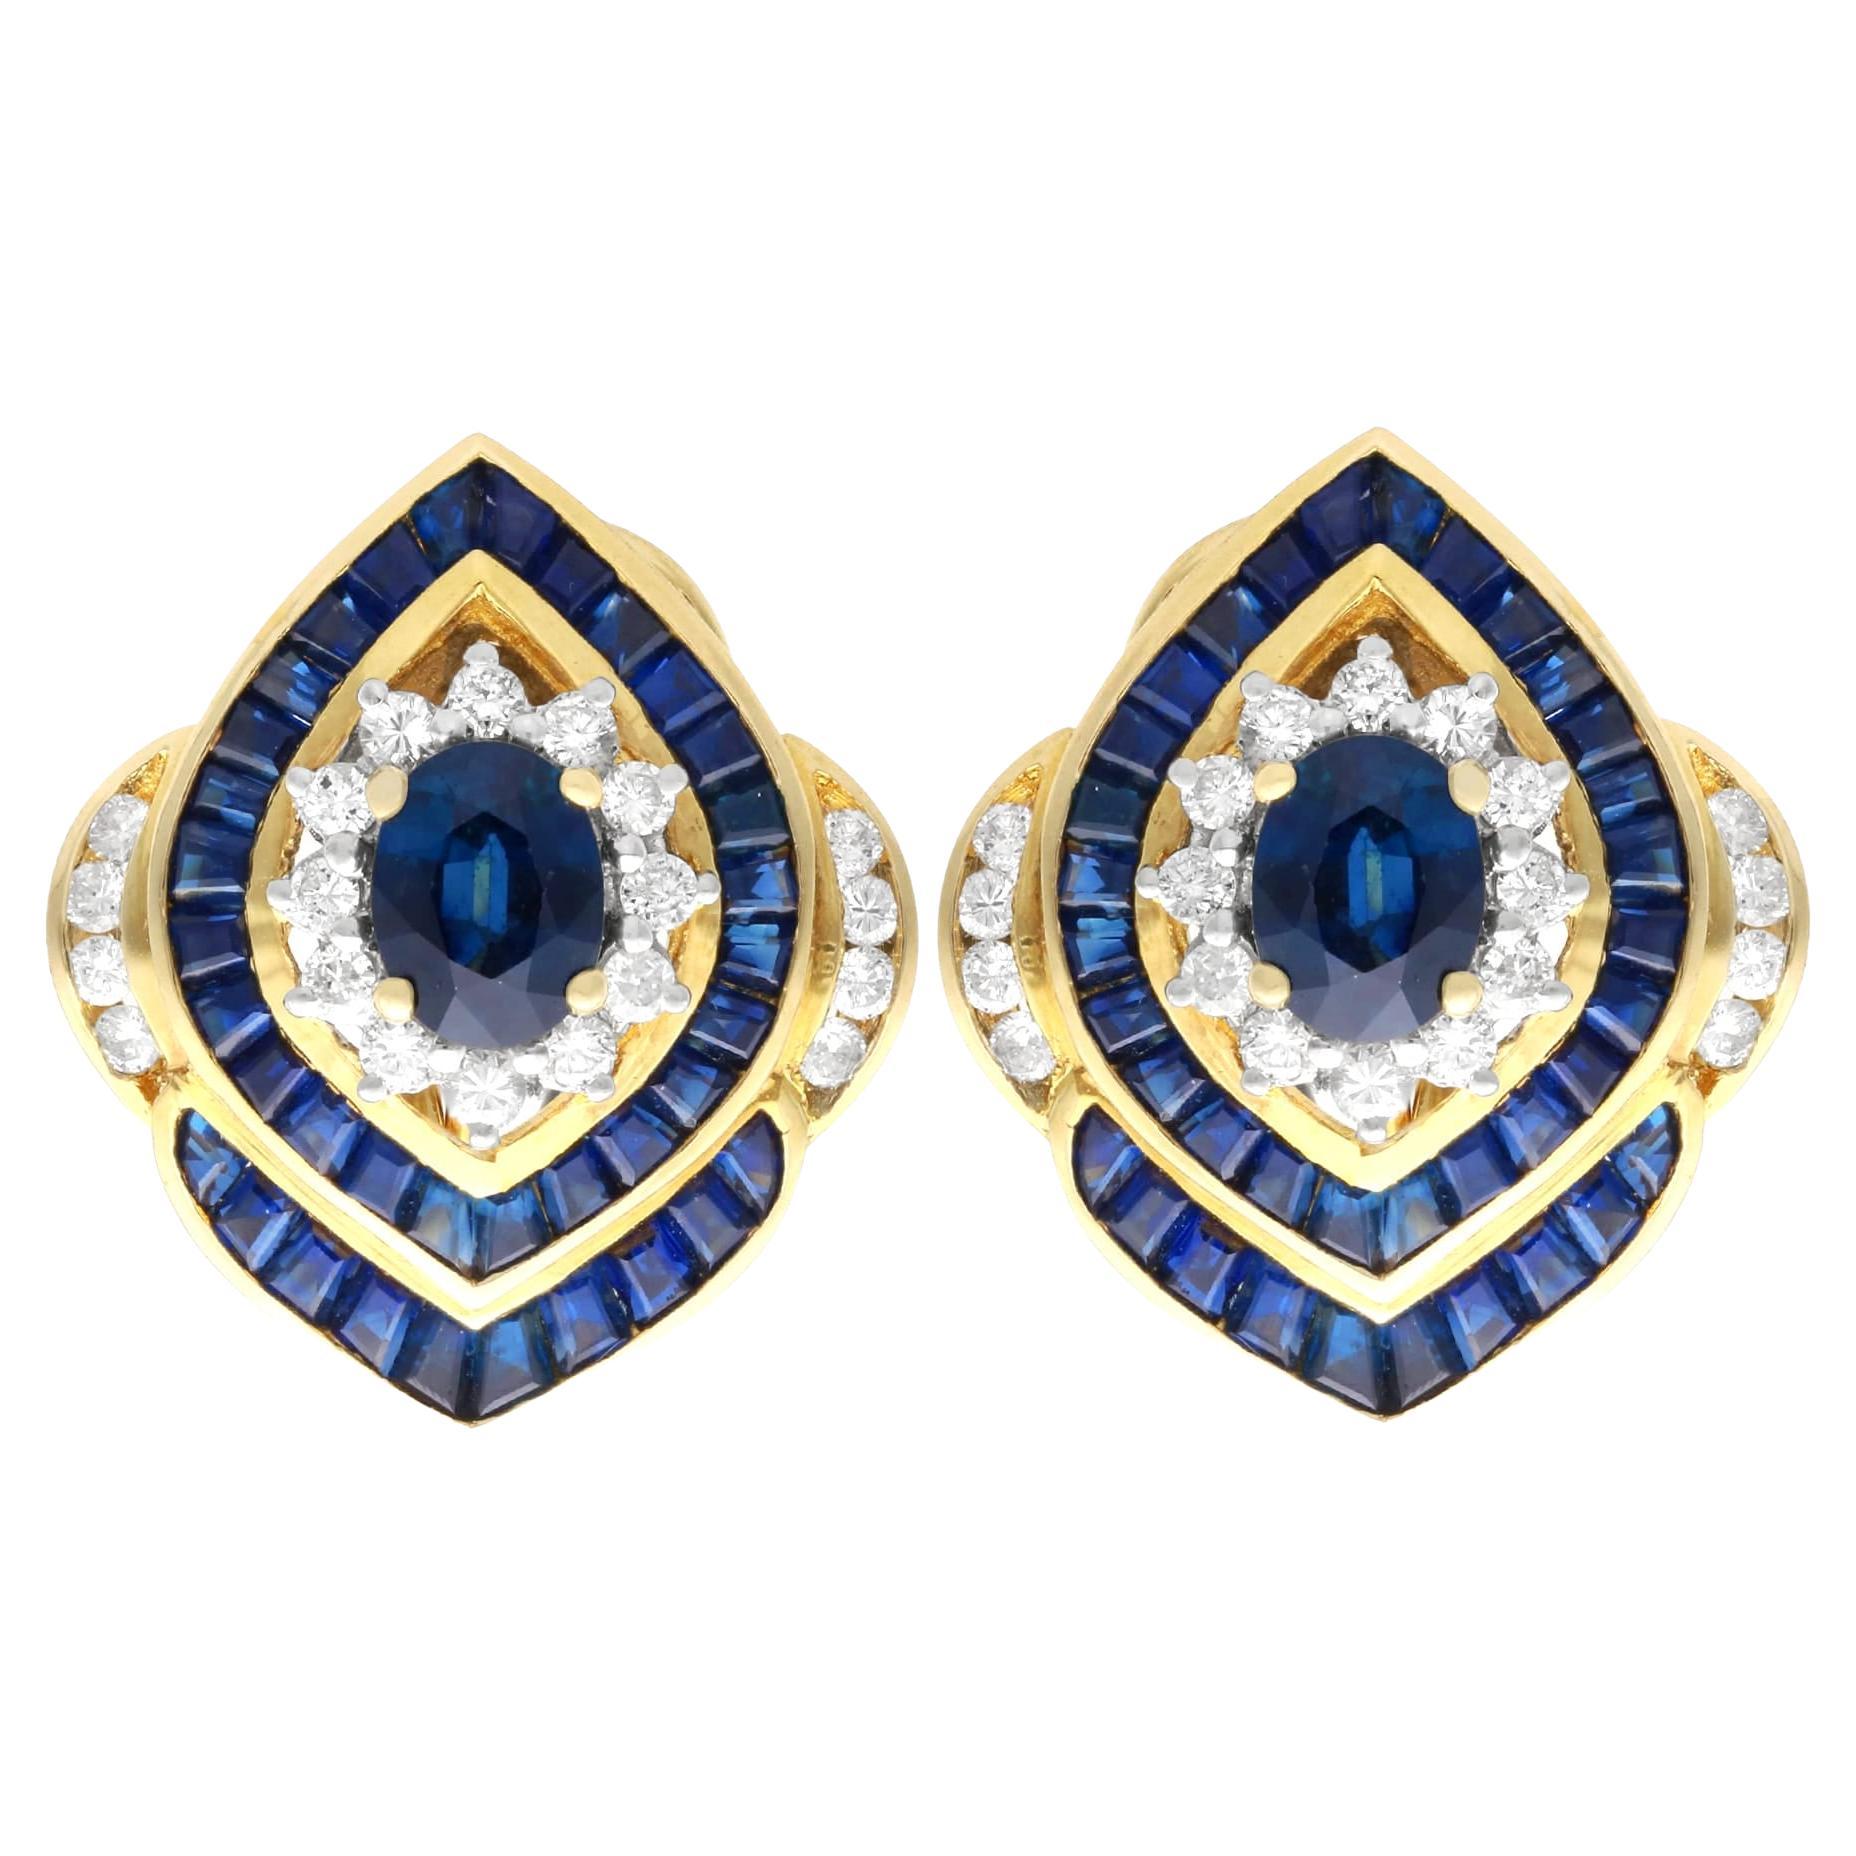 Vintage 5.20ct Sapphire and 0.90ct Diamond 18k Yellow Gold Earrings